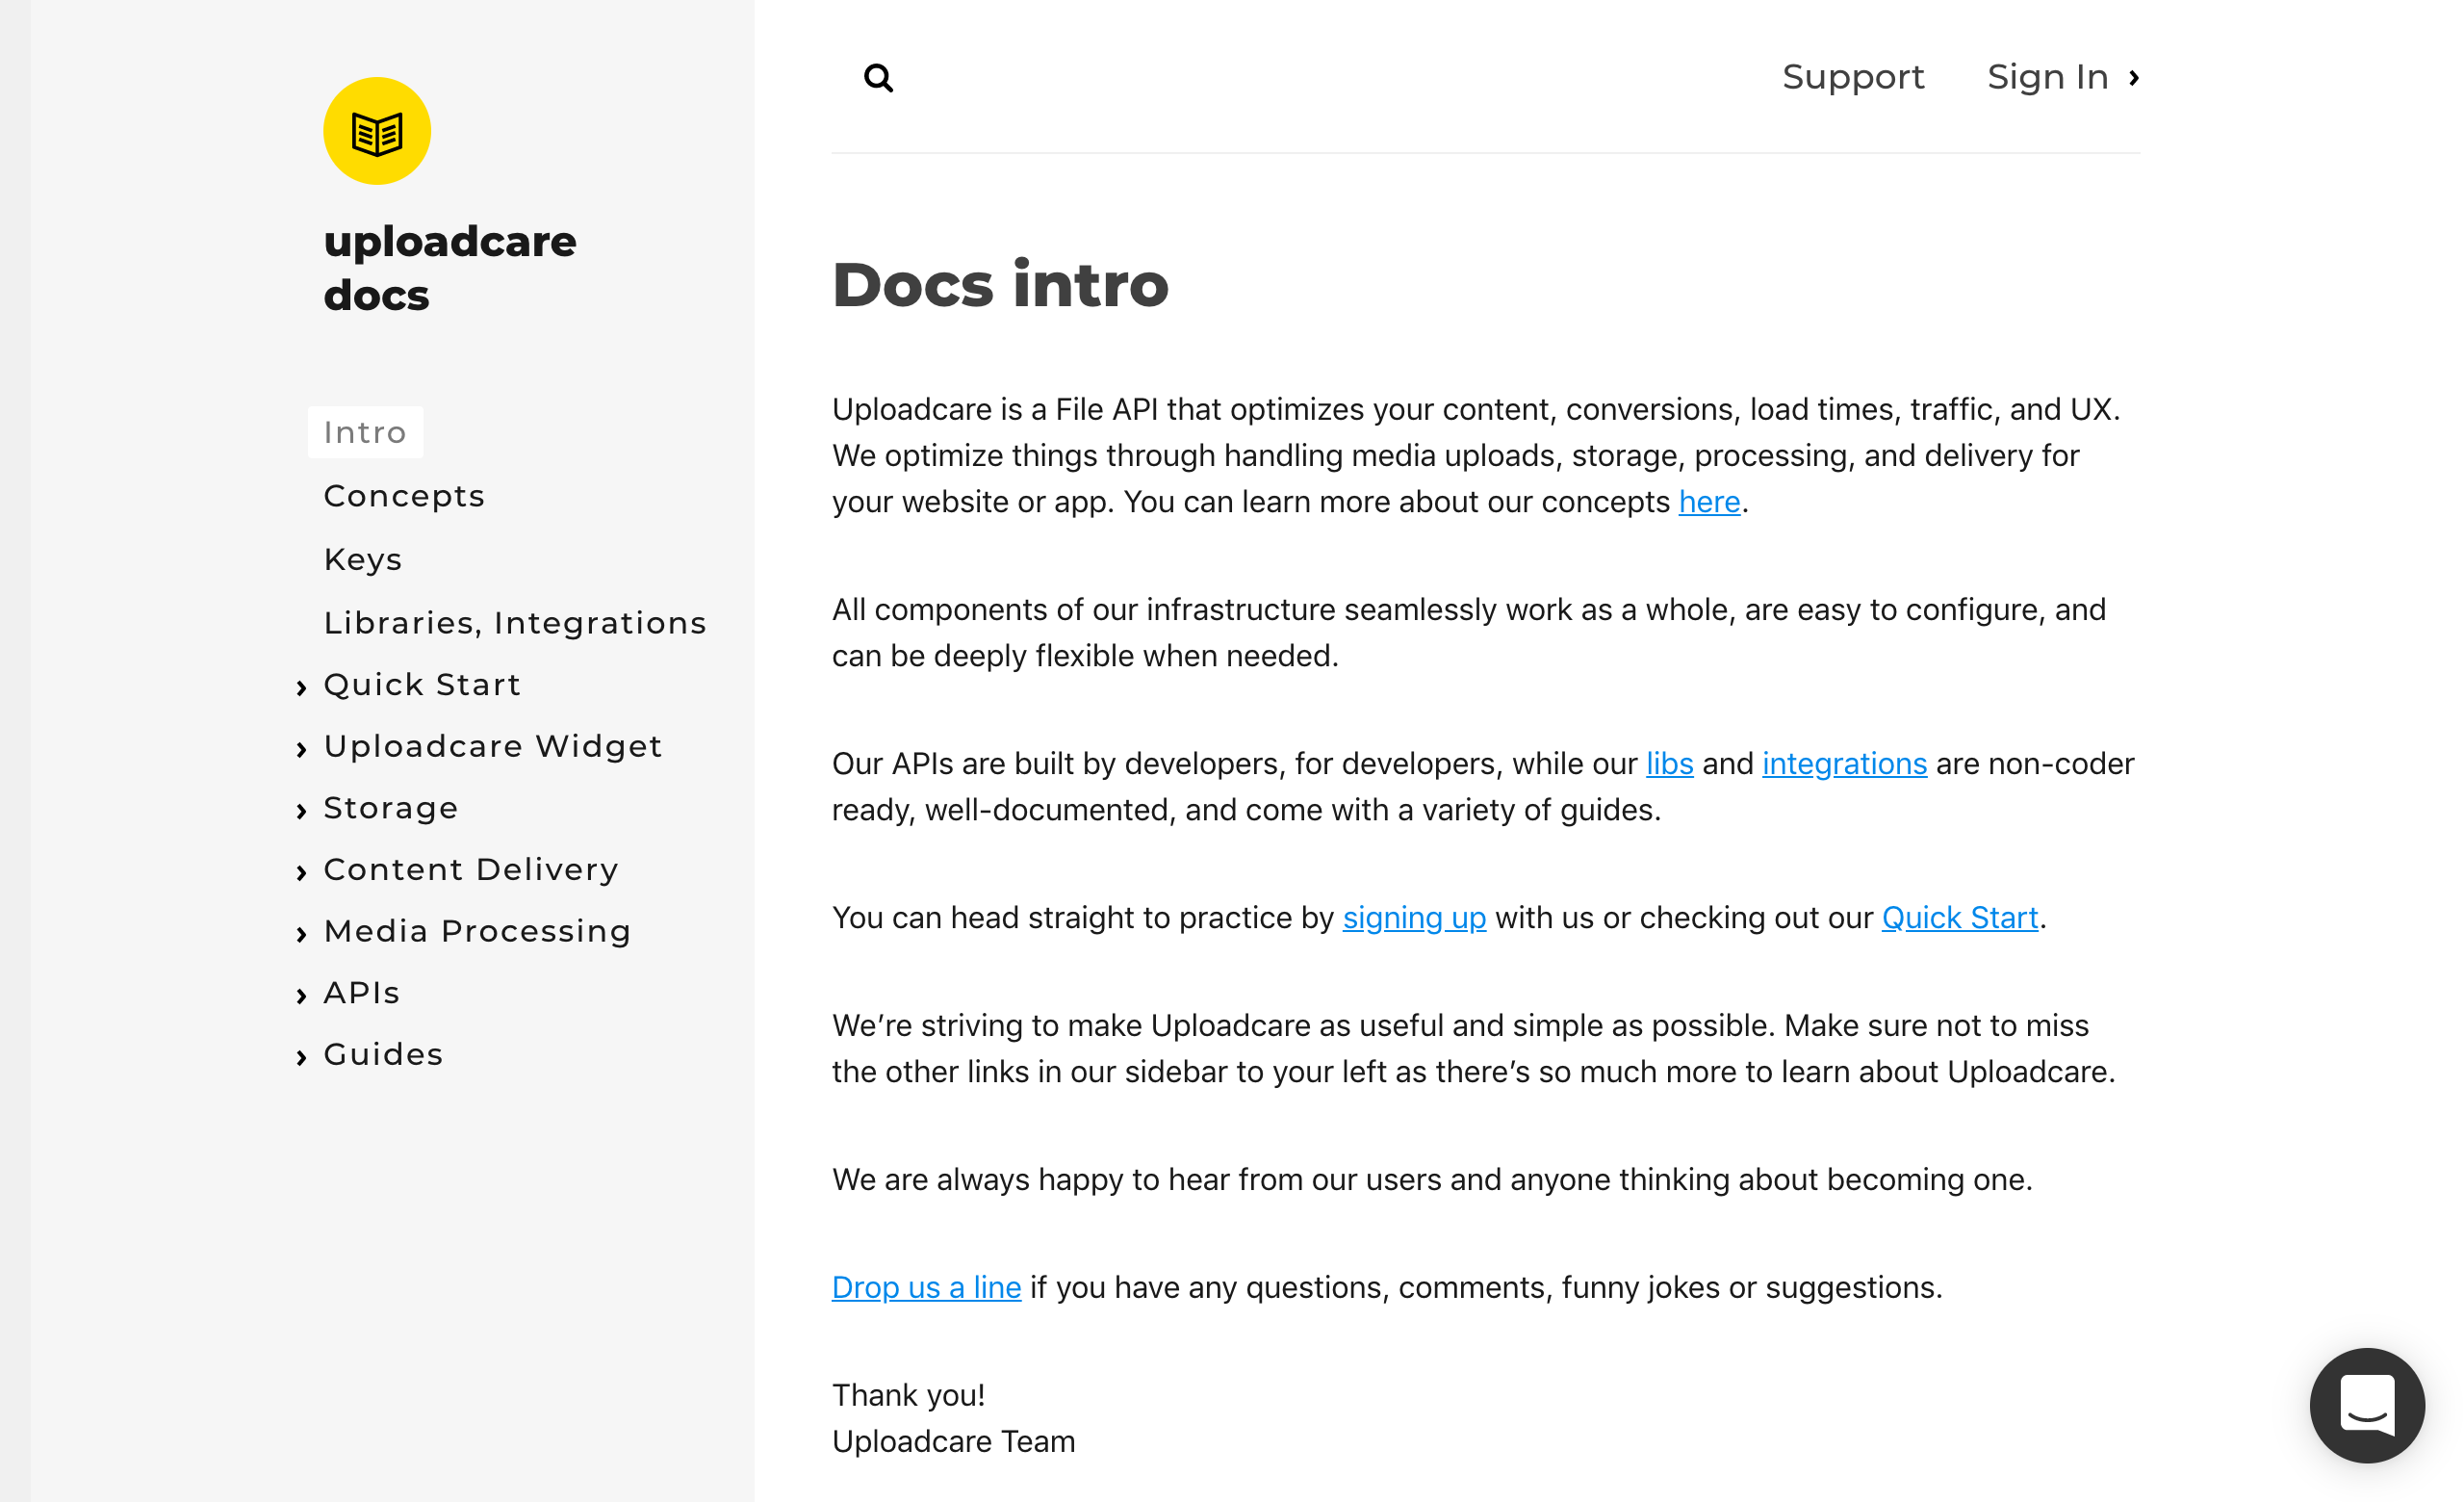 A screenshot of Uploadcare's Docs Intro page